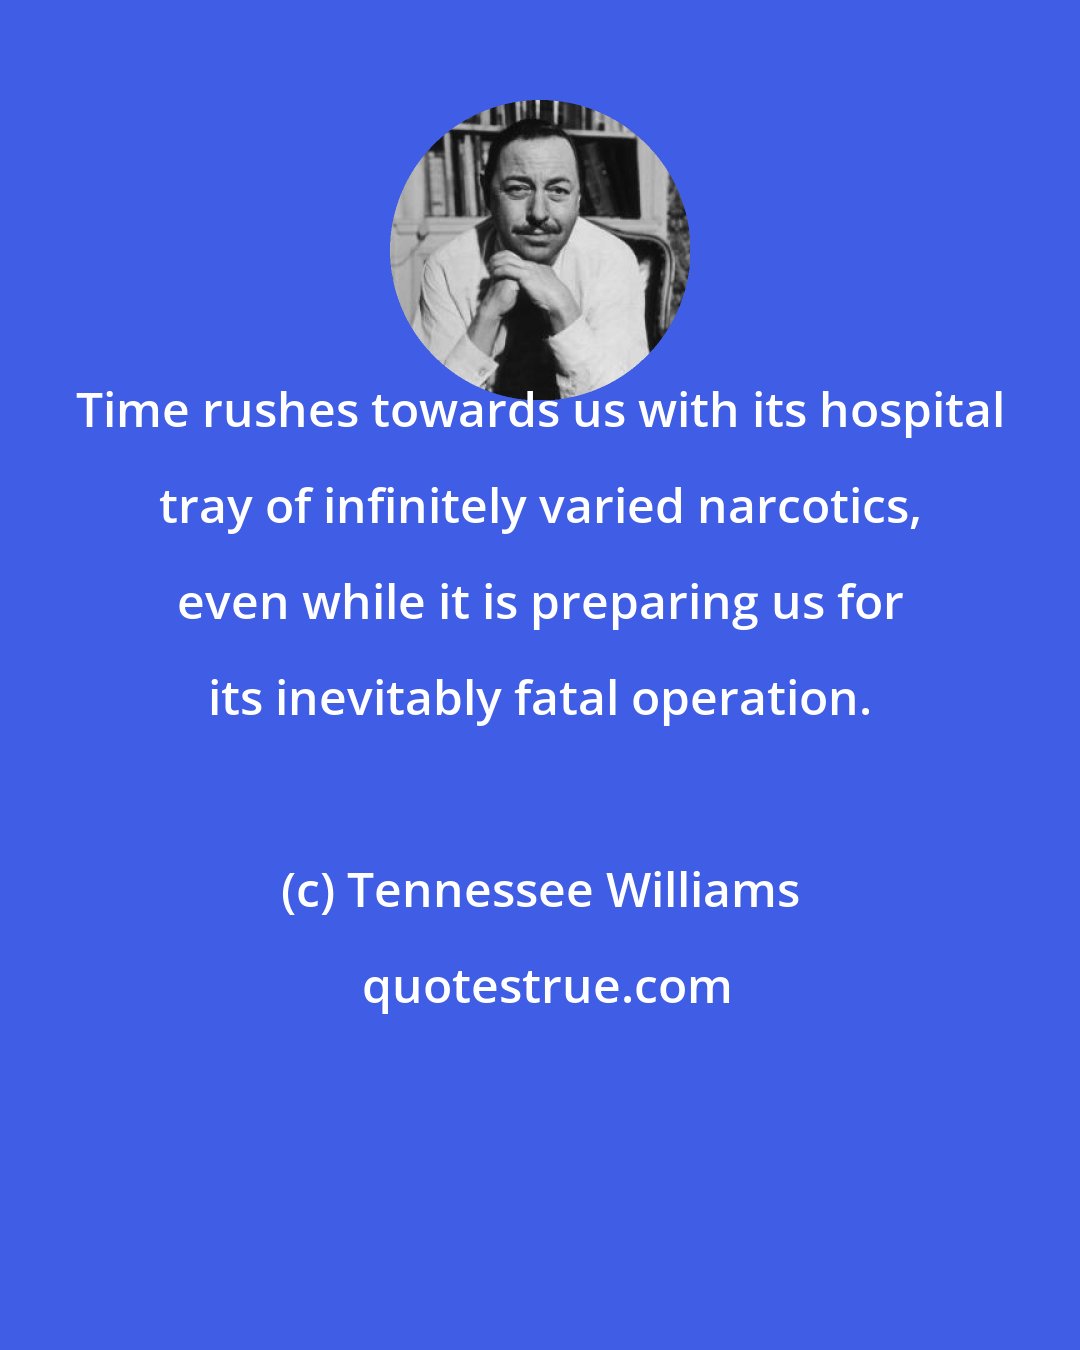 Tennessee Williams: Time rushes towards us with its hospital tray of infinitely varied narcotics, even while it is preparing us for its inevitably fatal operation.